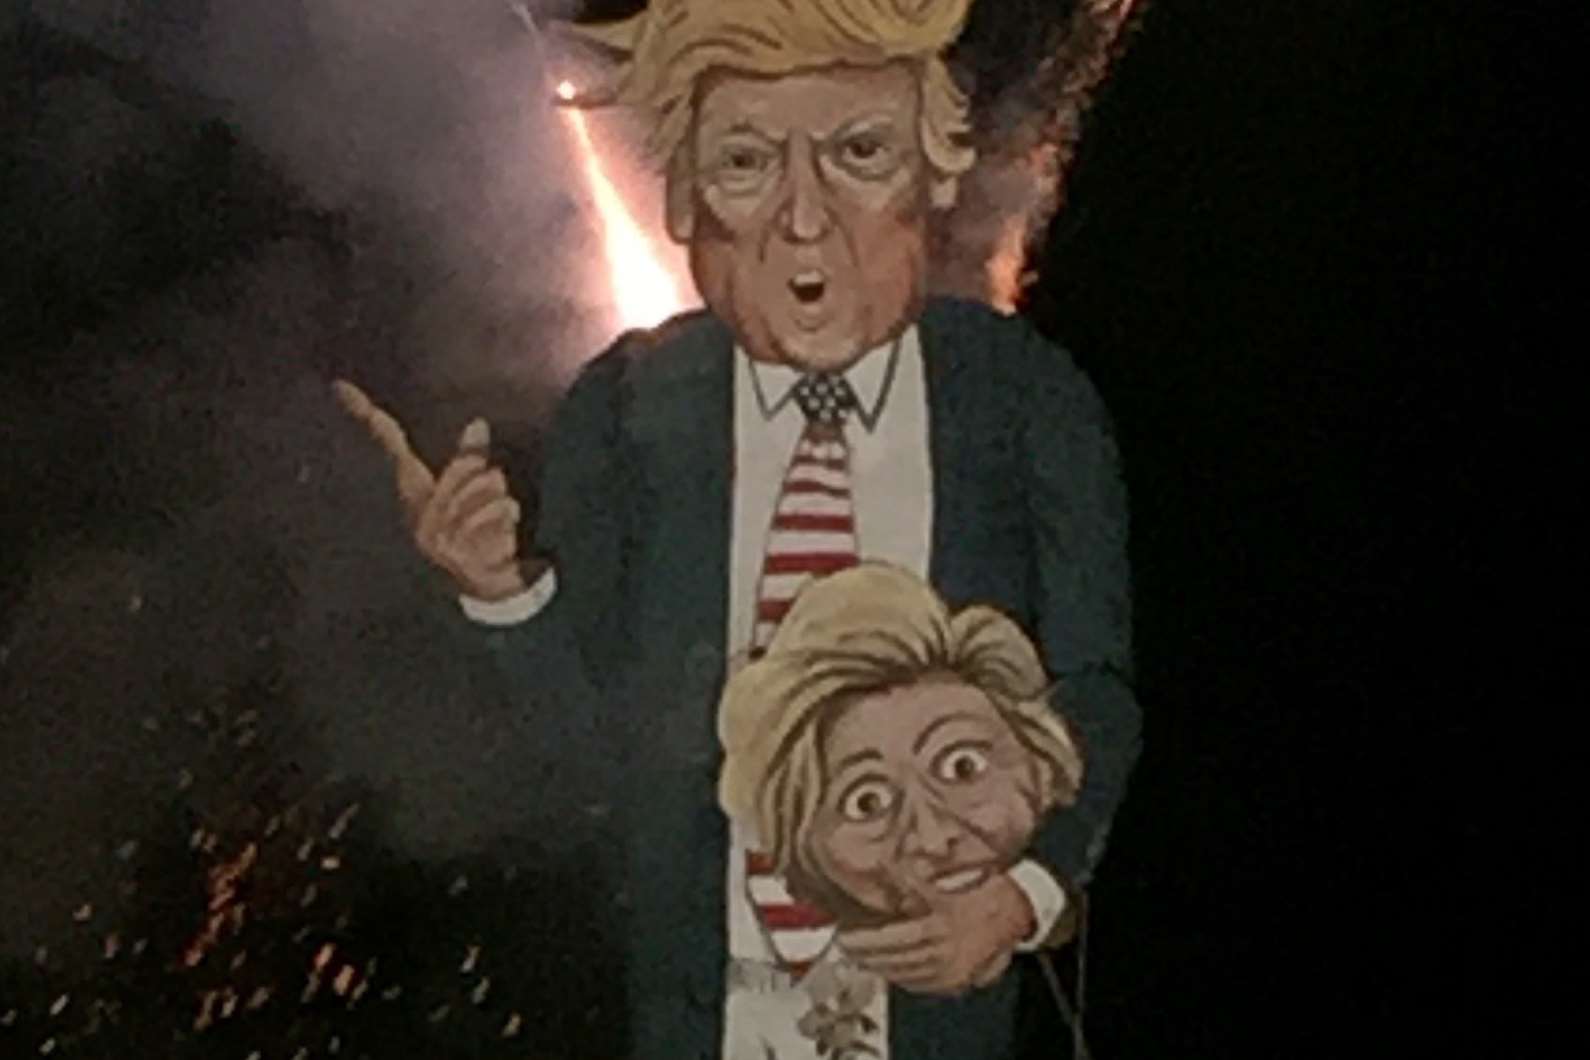 An effigy of Donald Trump goes up in flames at the Edenbridge Bonfire Society's firework night